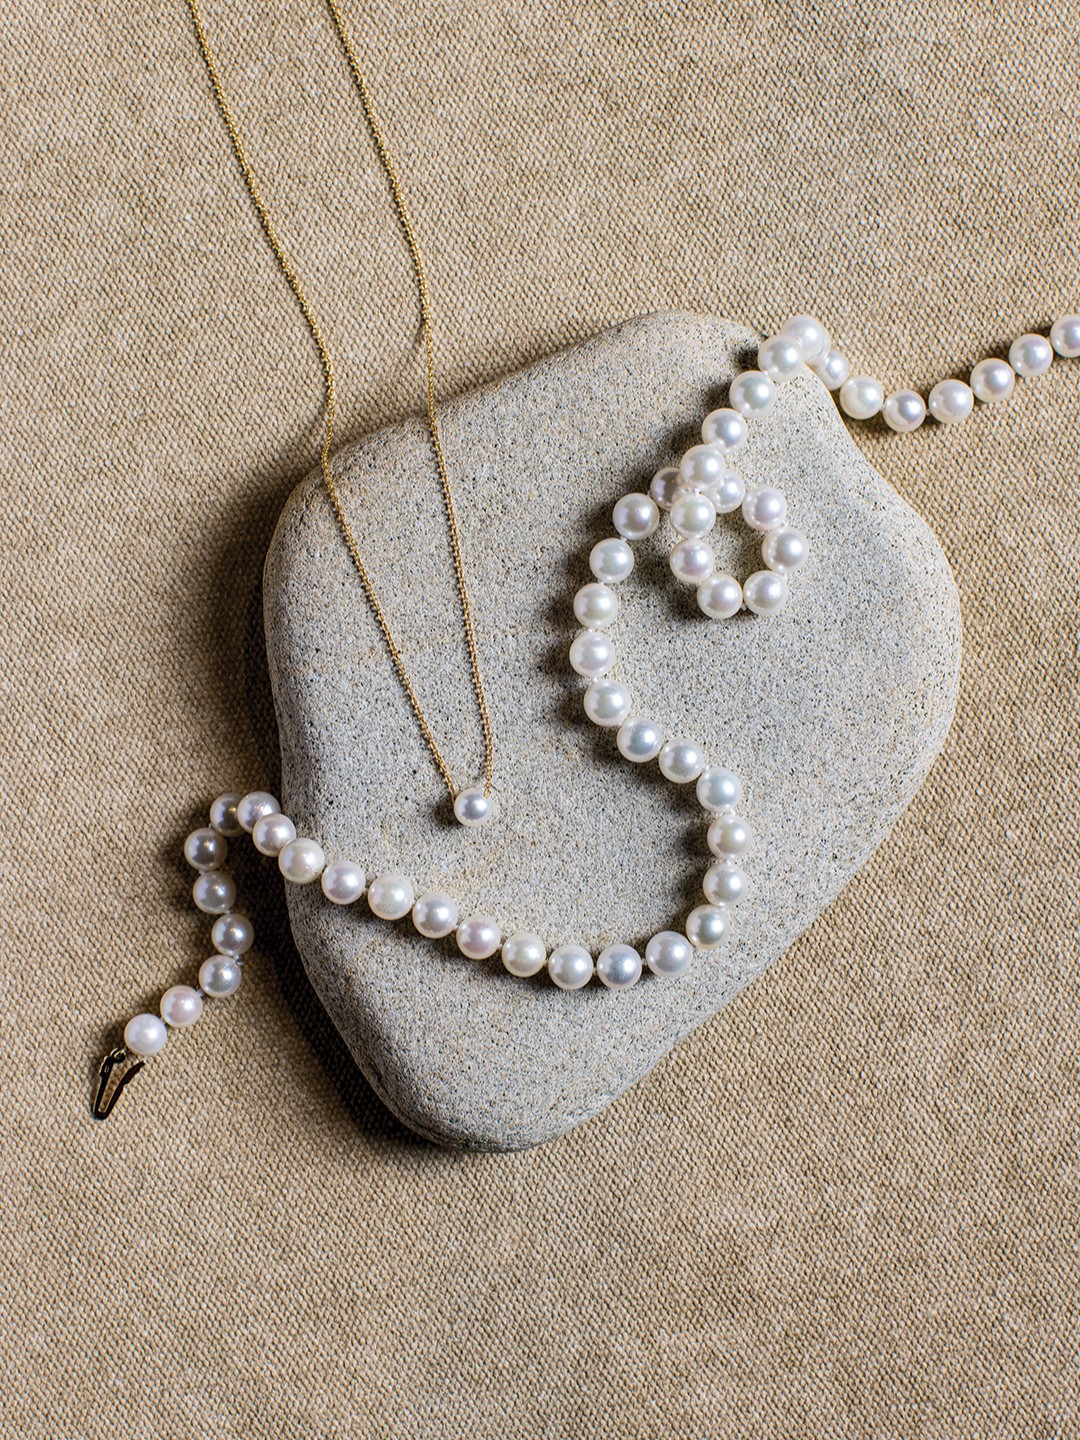 “Pearls are starting to make a little bit of a comeback. We do a floating pearl. It’s just a single pearl, and it’s movable, so it floats on the chain. And that’s been a very popular seller for us,” Foote says.